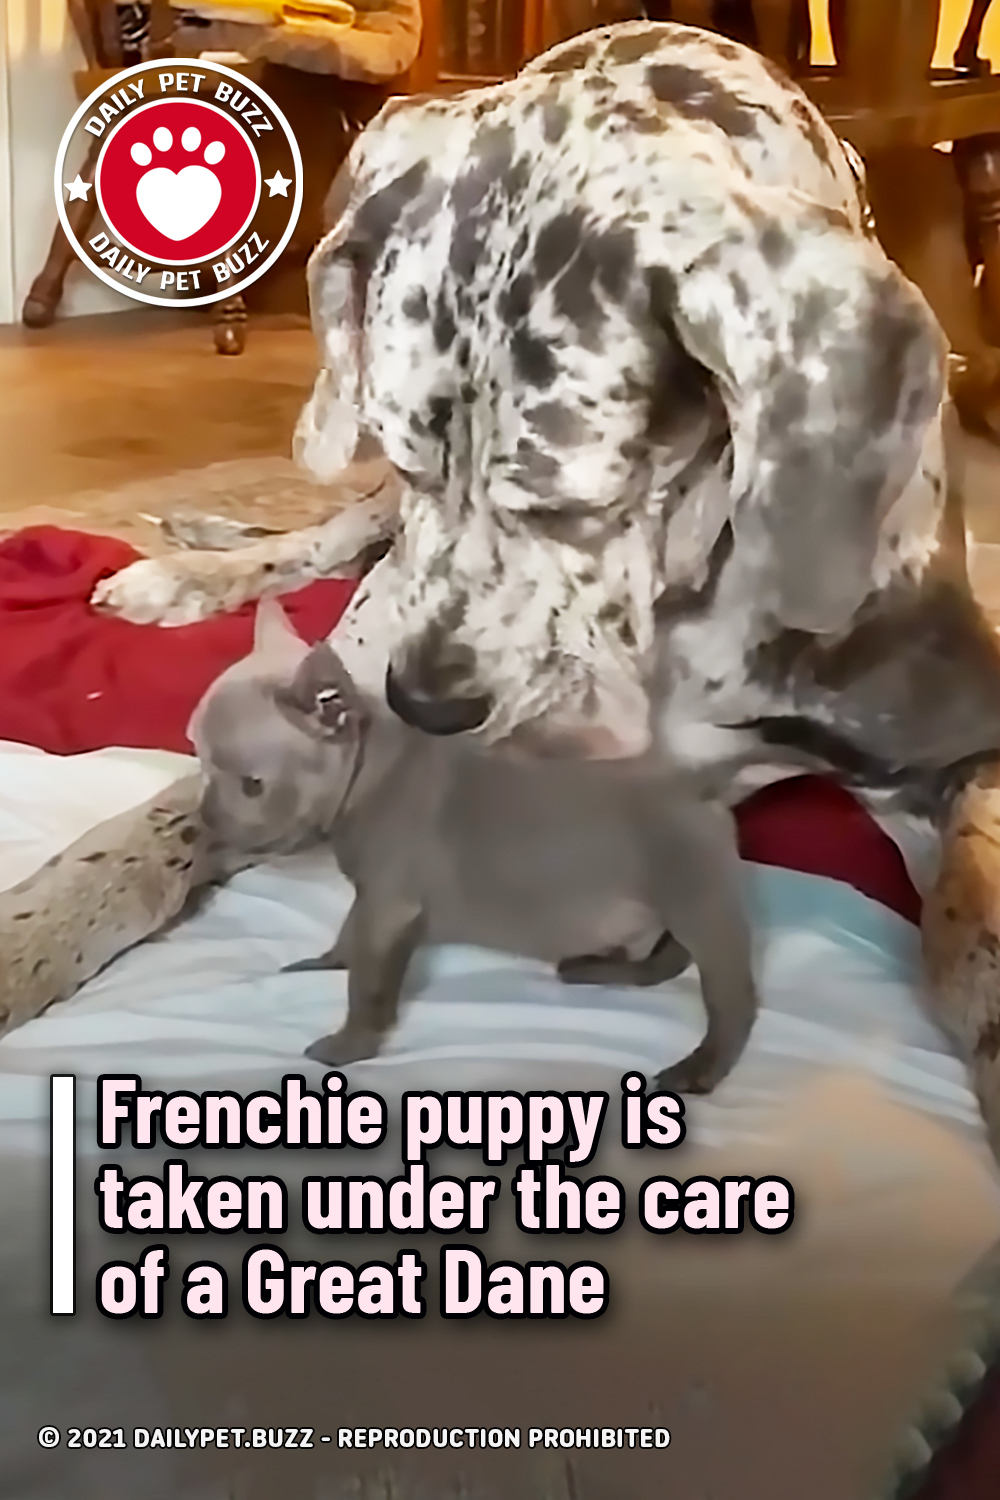 Frenchie puppy is taken under the care of a Great Dane